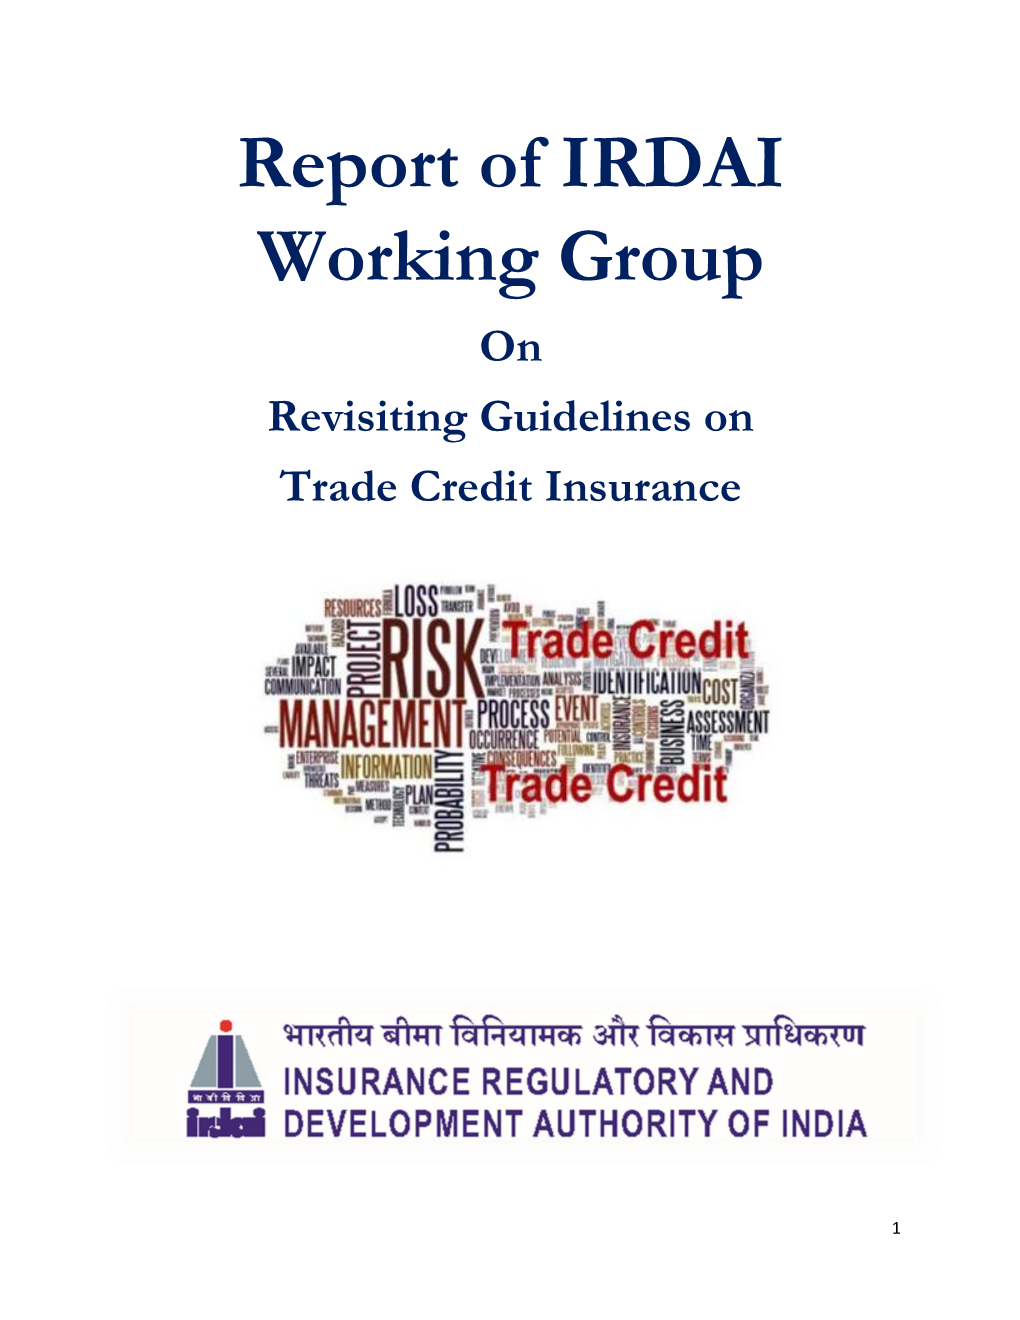 Report of IRDAI Working Group on Revisiting Guidelines on Trade Credit Insurance